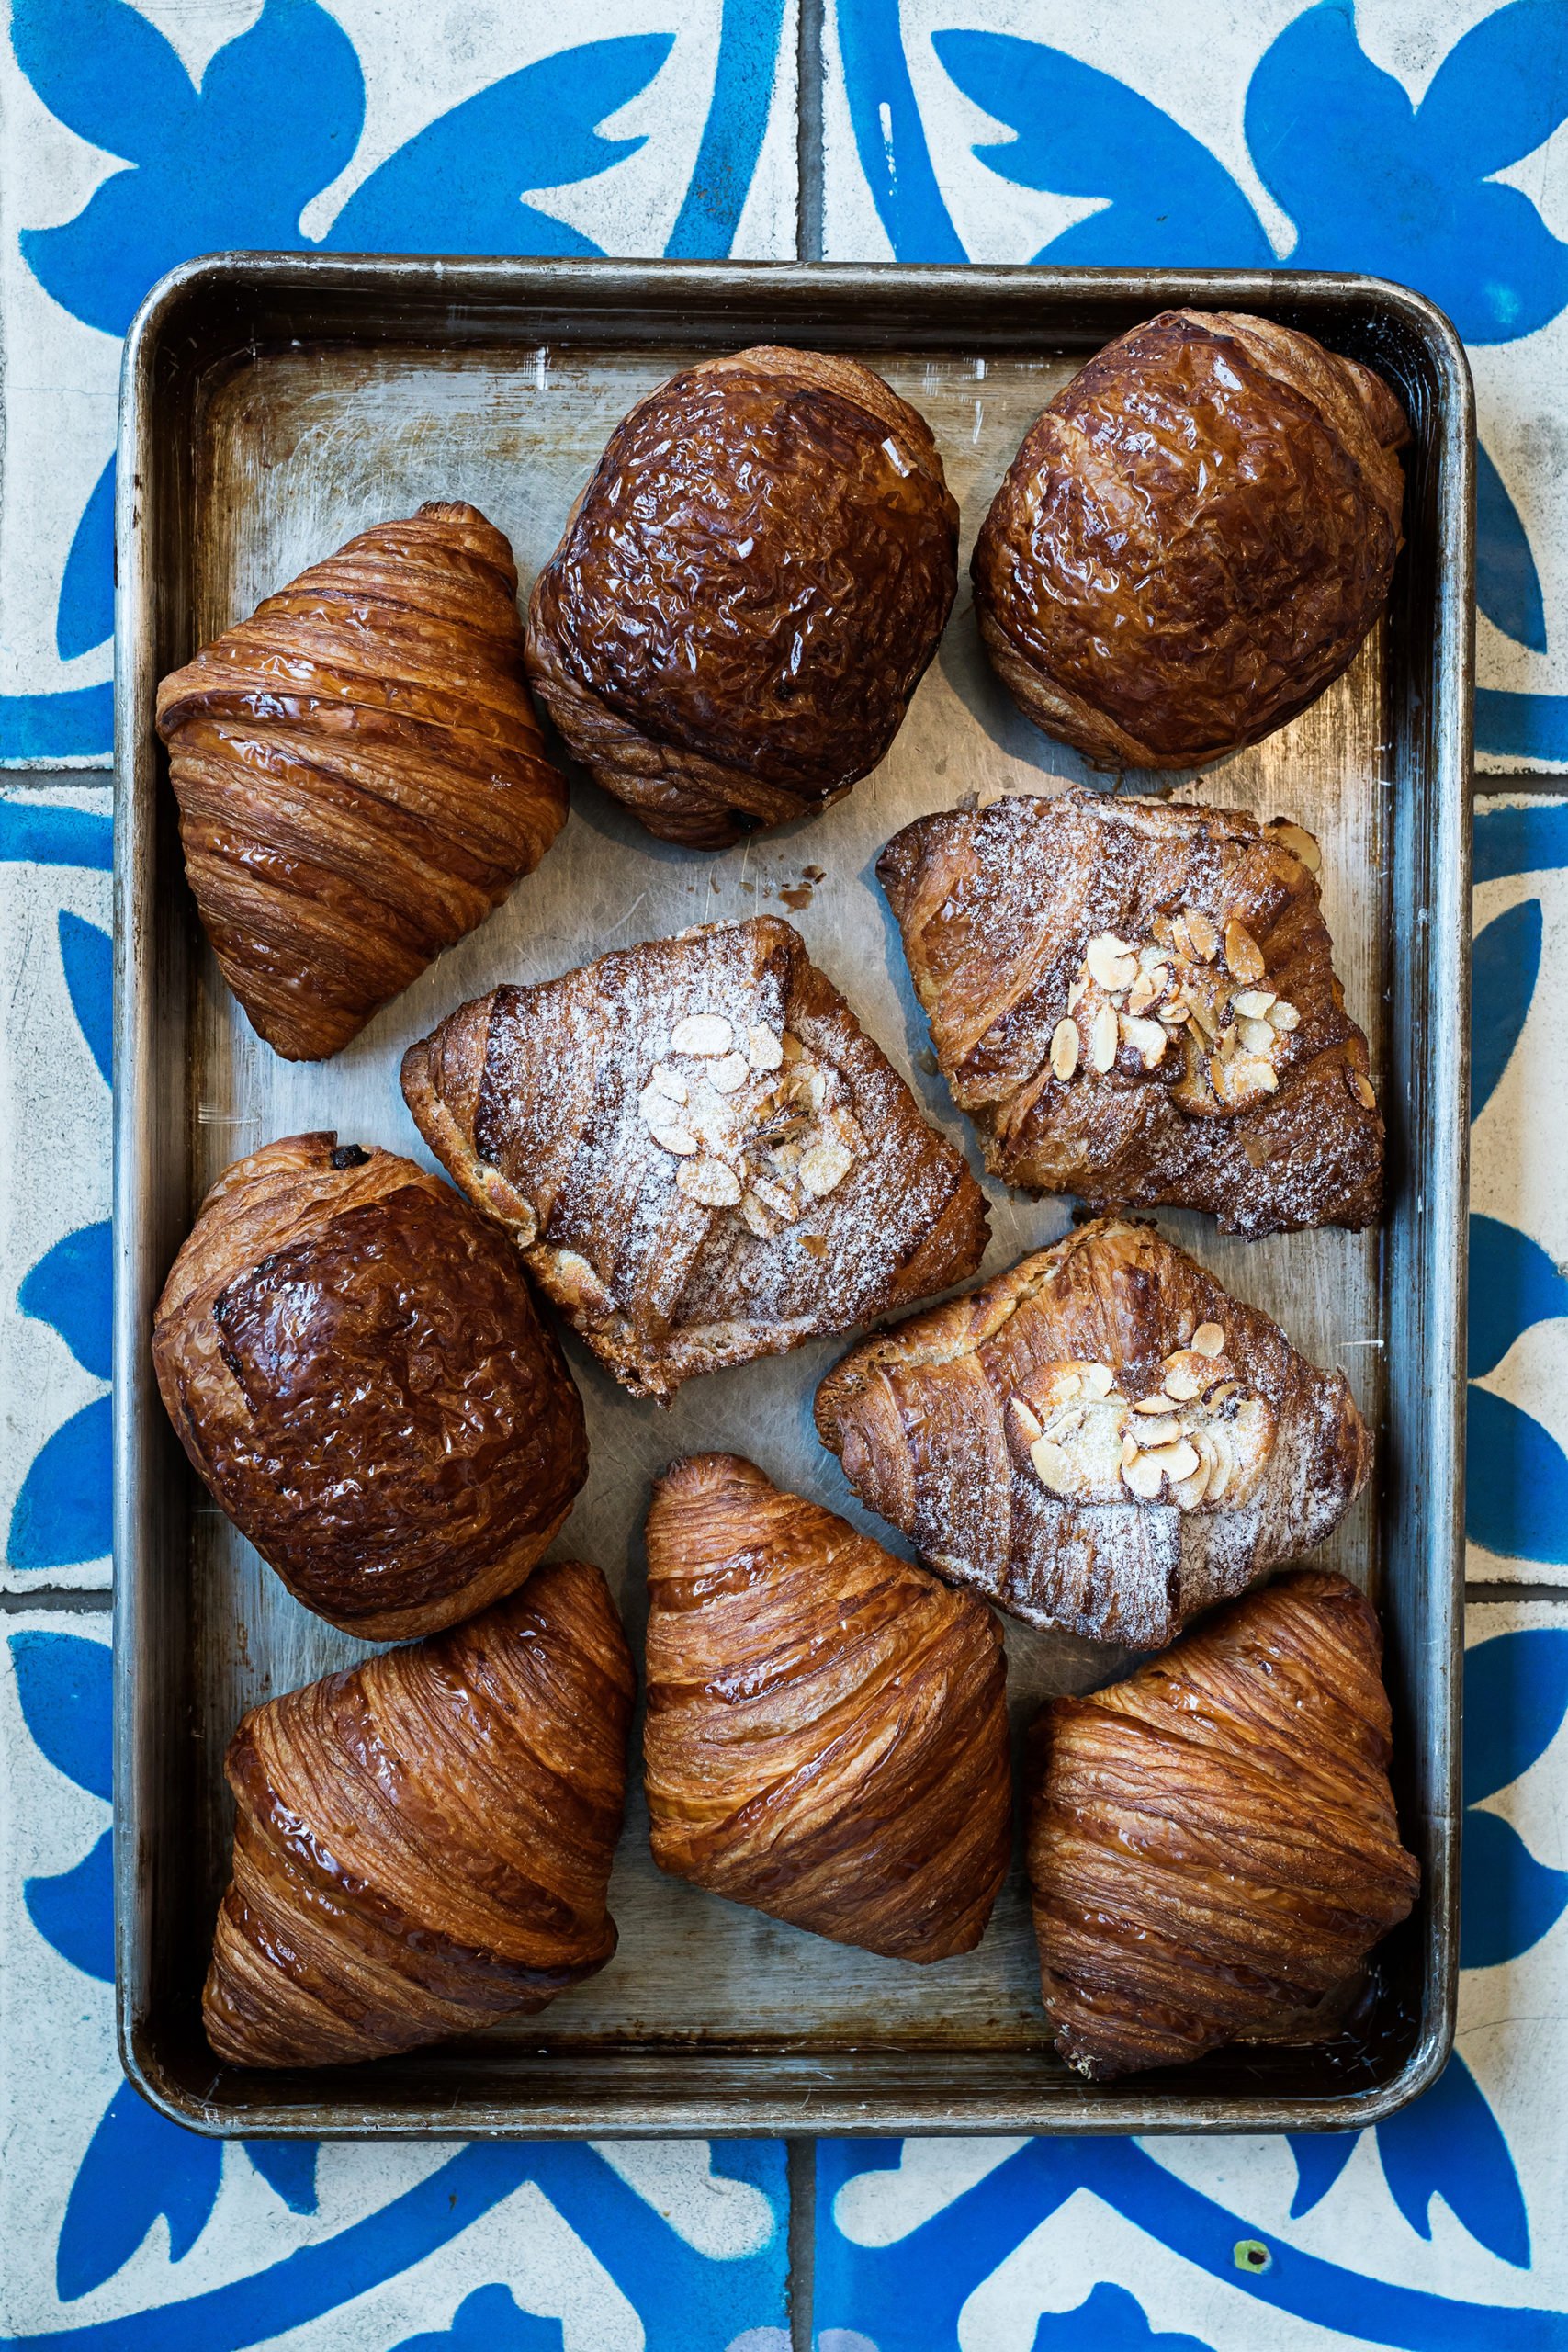 Butter, almond, and chocolate croissants at Pluma. Photograph by Scott Suchman.